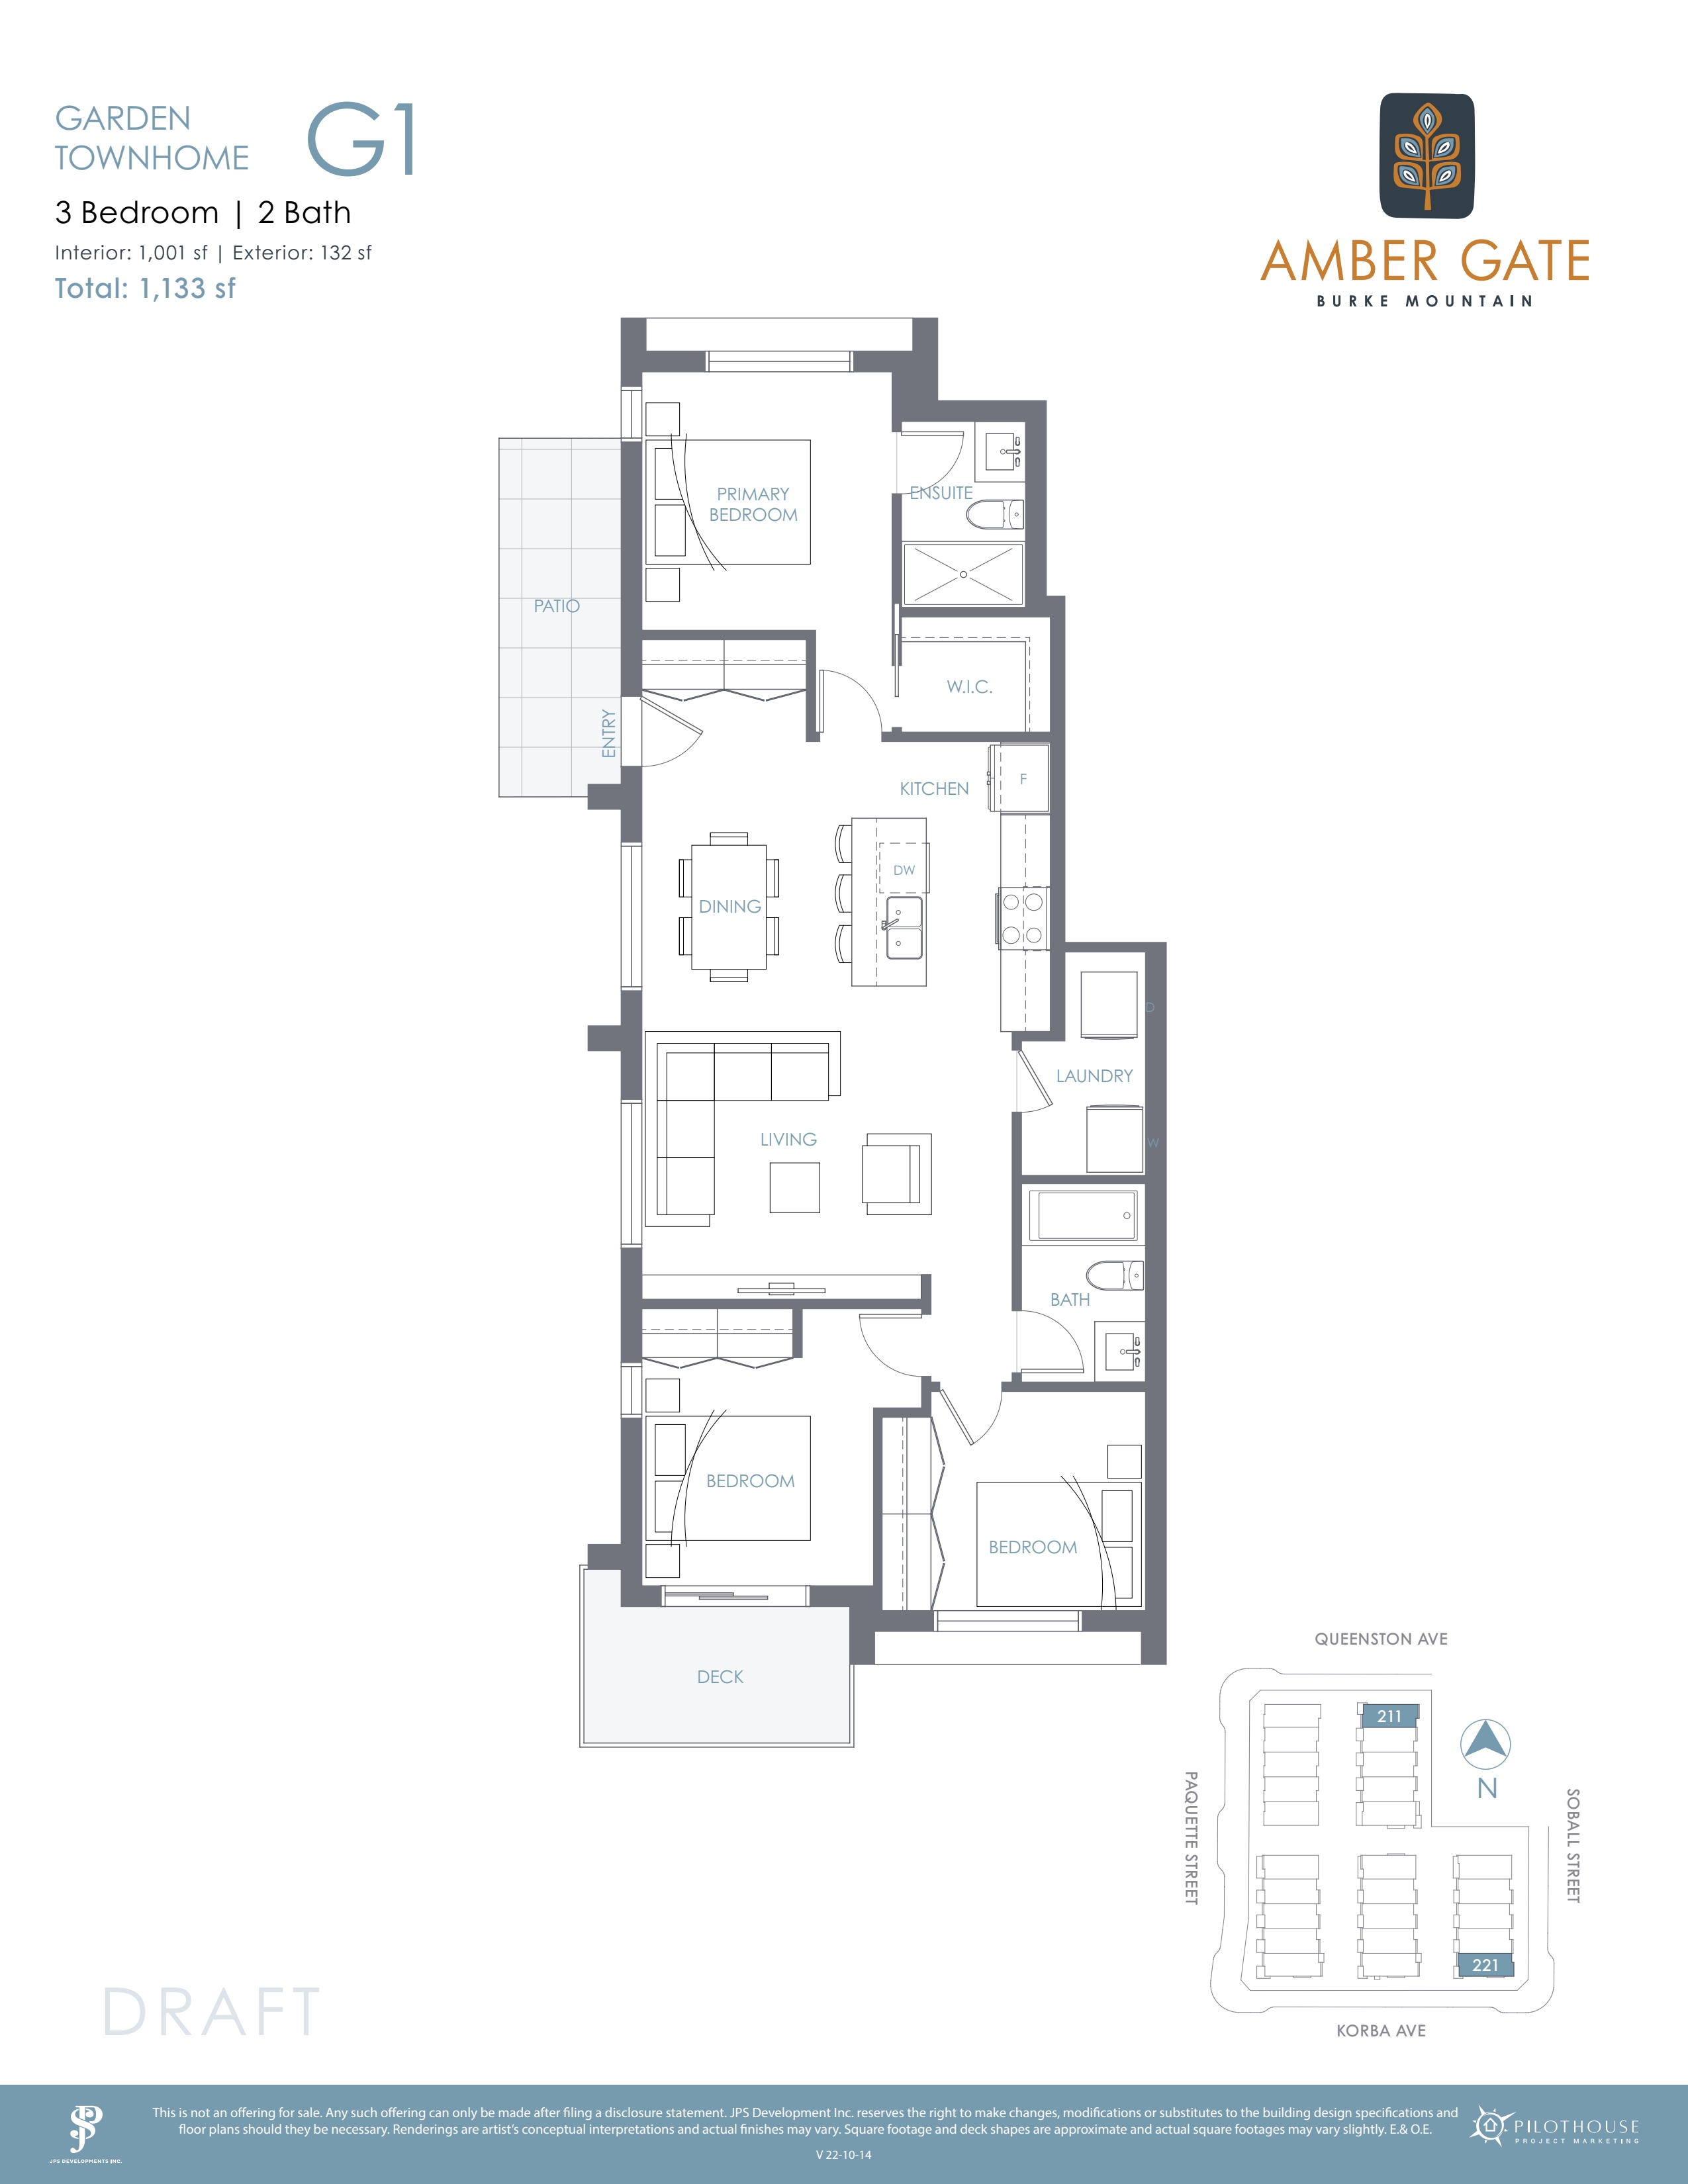  Floor Plan of Amber Gate Towns with undefined beds